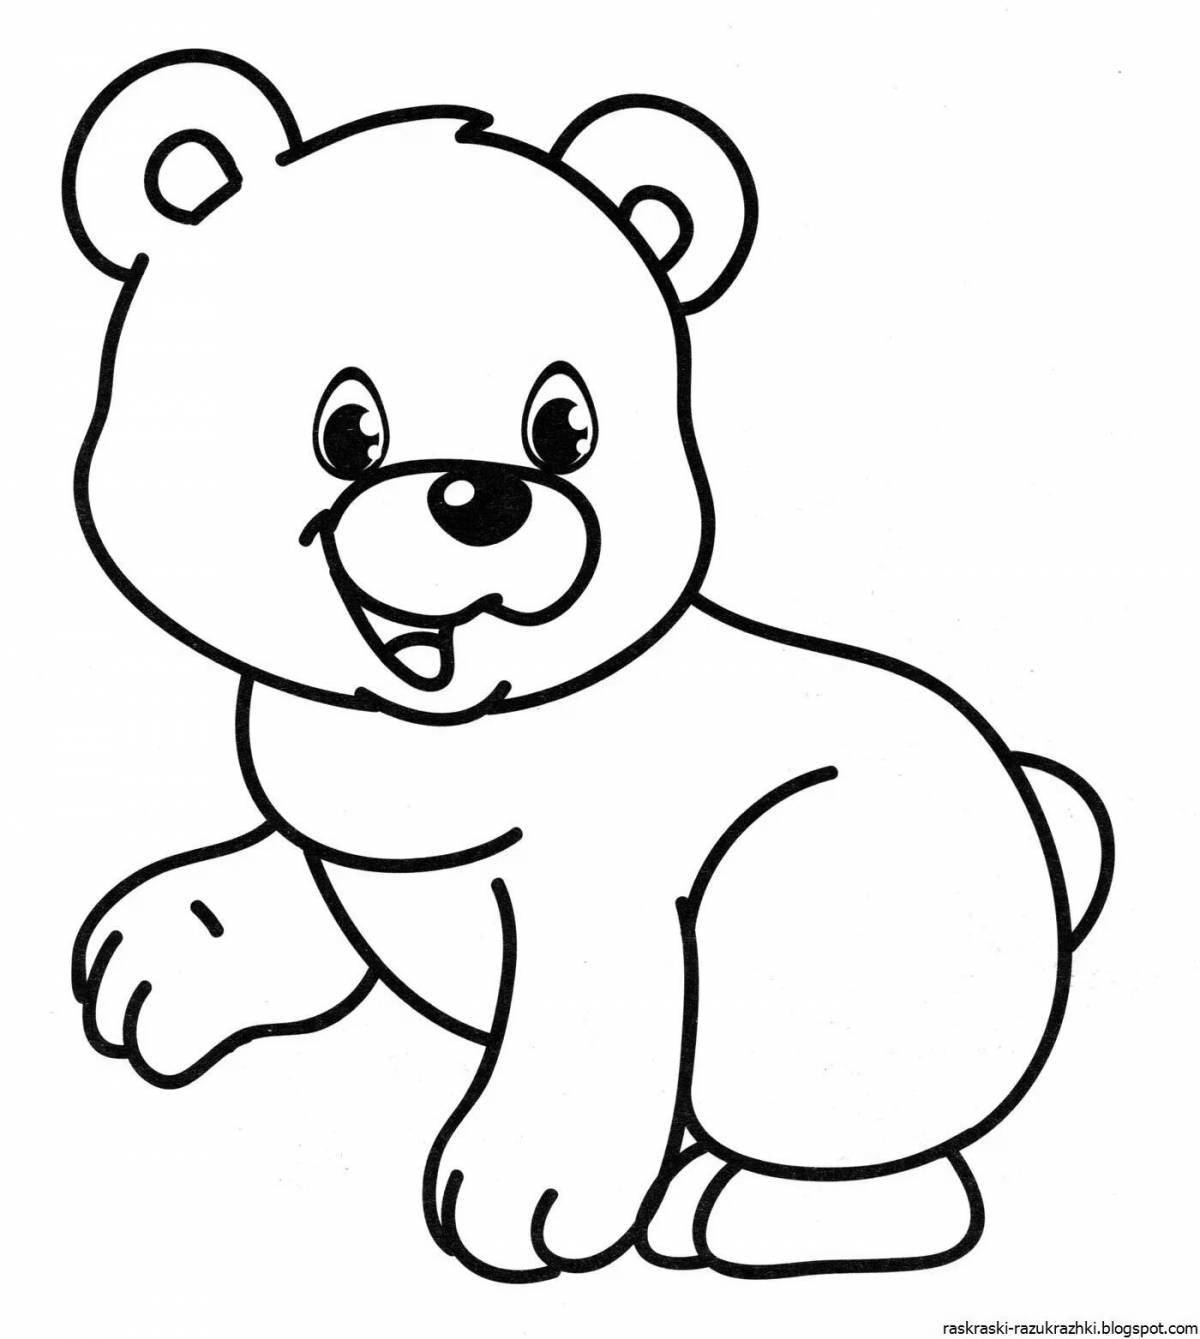 Fun bear coloring book for 4-5 year olds